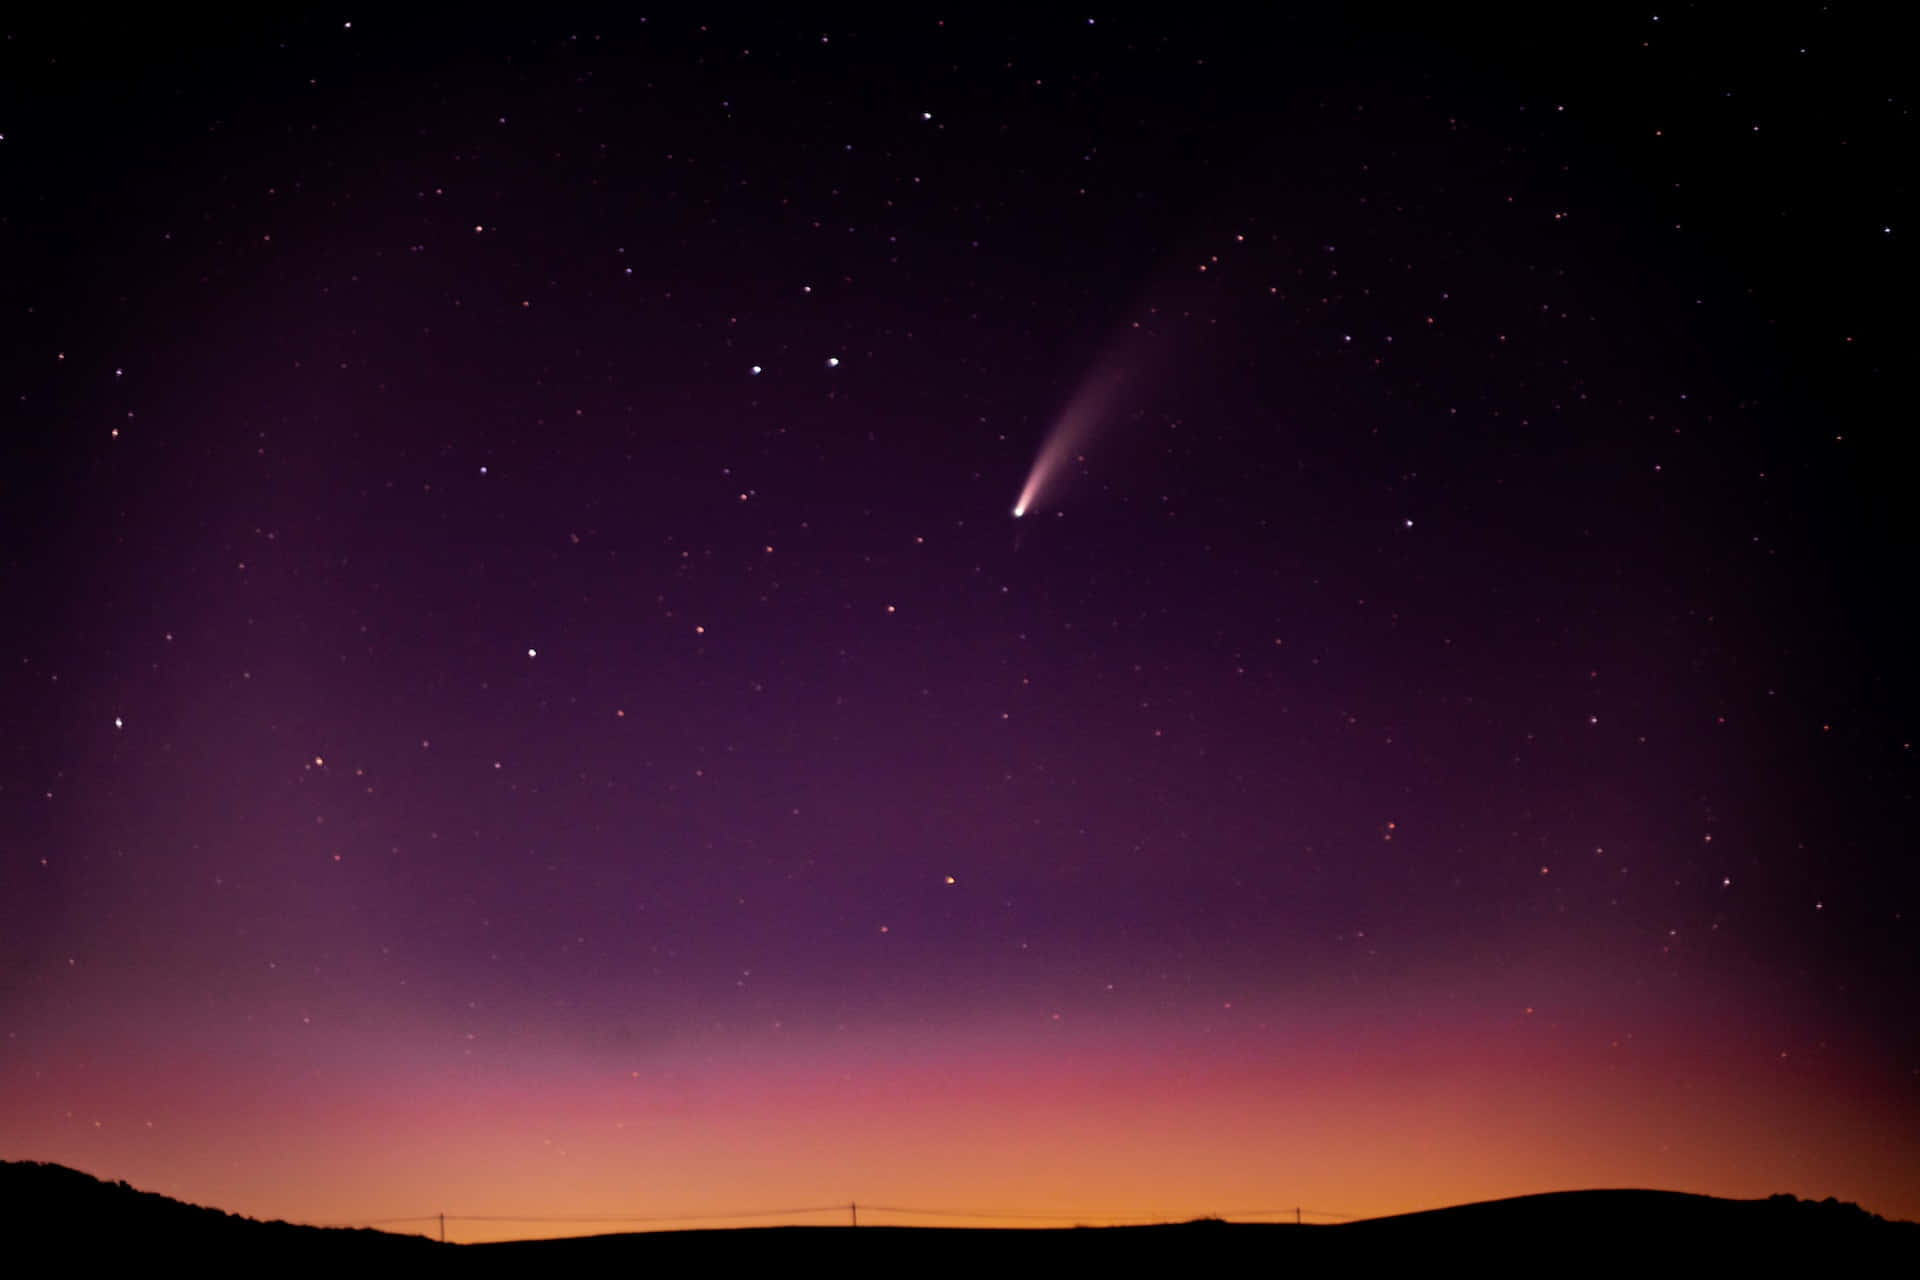 Stunning Comet Travelling through the Star-studded Night Sky Wallpaper